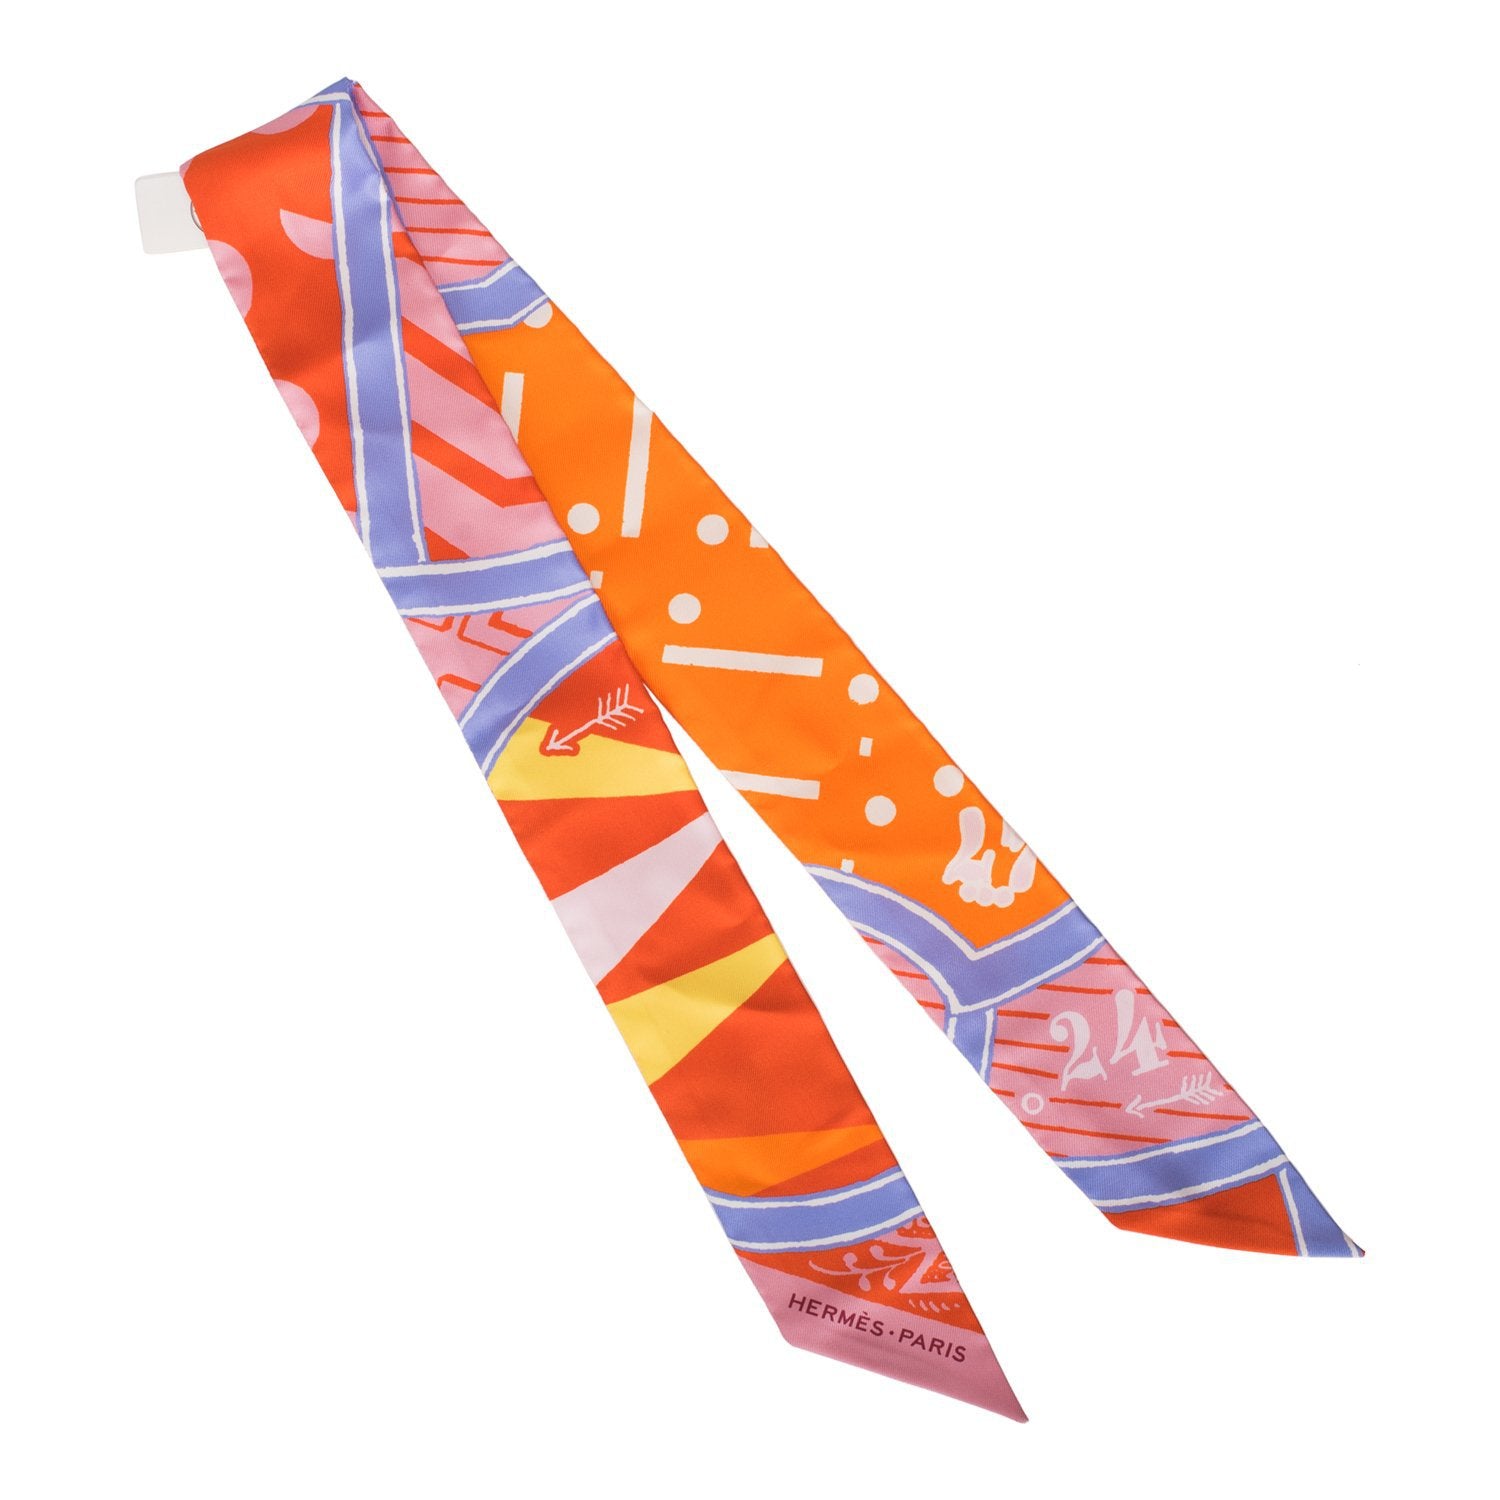 Hermès Twilly Scarves – Madison Avenue Couture